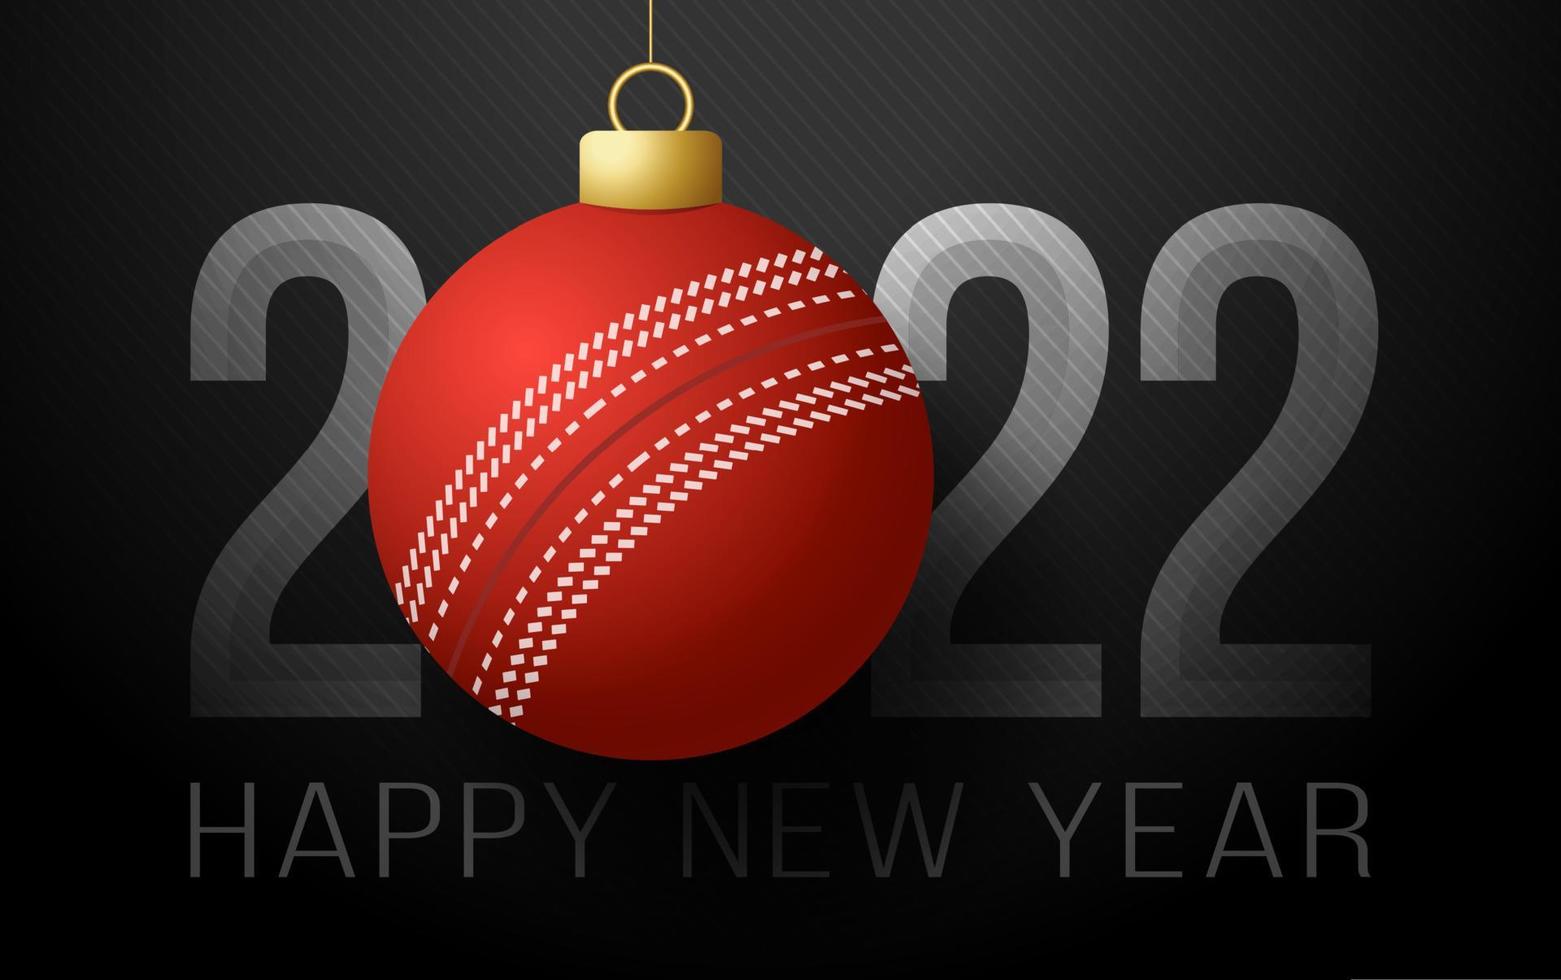 2022 Happy New Year. Sports greeting card with cricket ball on the luxury background. Vector illustration.